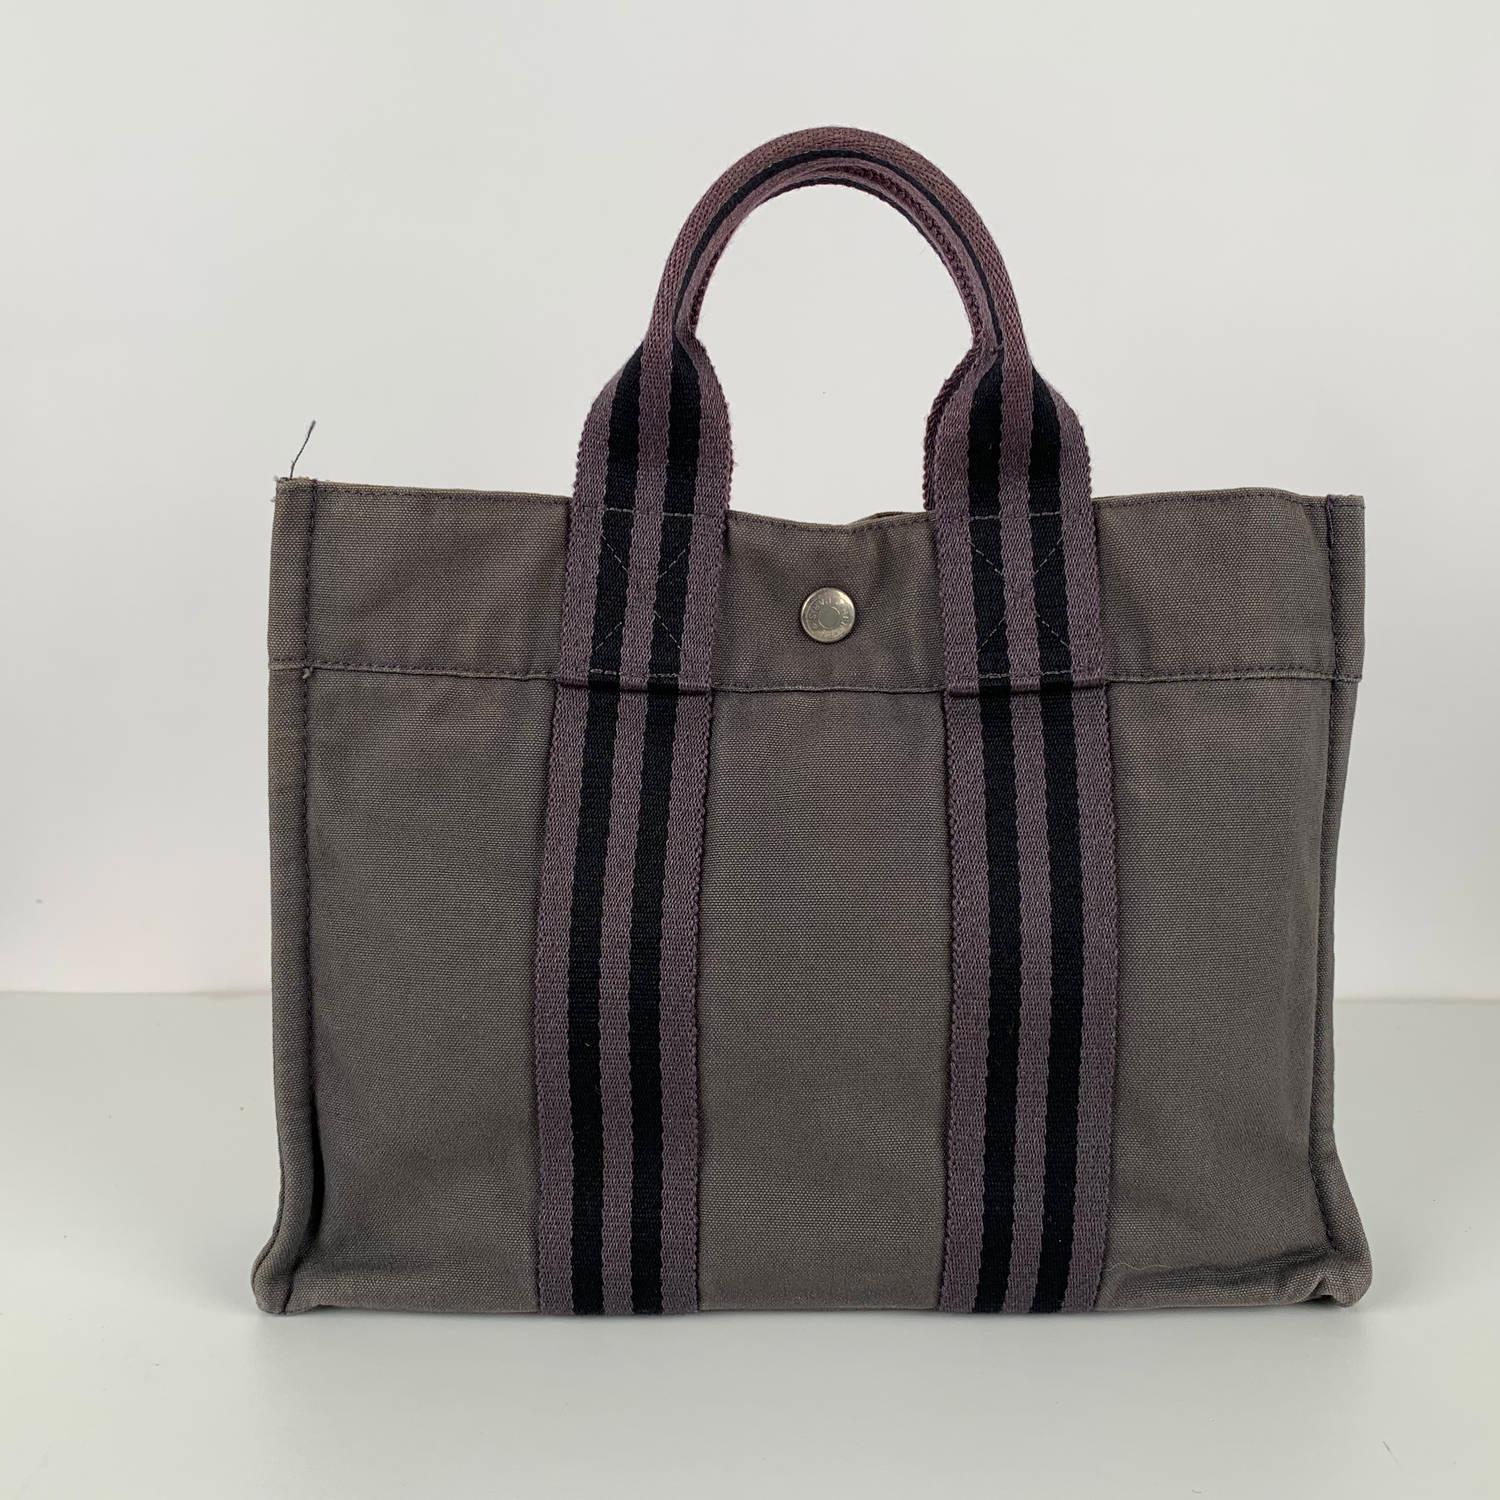 Hermes Paris Vintage Gray Cotton Canvas Fourre Tout PM Tote Handbag

Color : Gray
Model : Fourre Tout PM
Material : Cotton
Gender : Women
Country of Manufacture : France
Size : Small
Bag Depth : 3 inches - 7.6 cm
Bag Height : 8.5 inches - 21.6